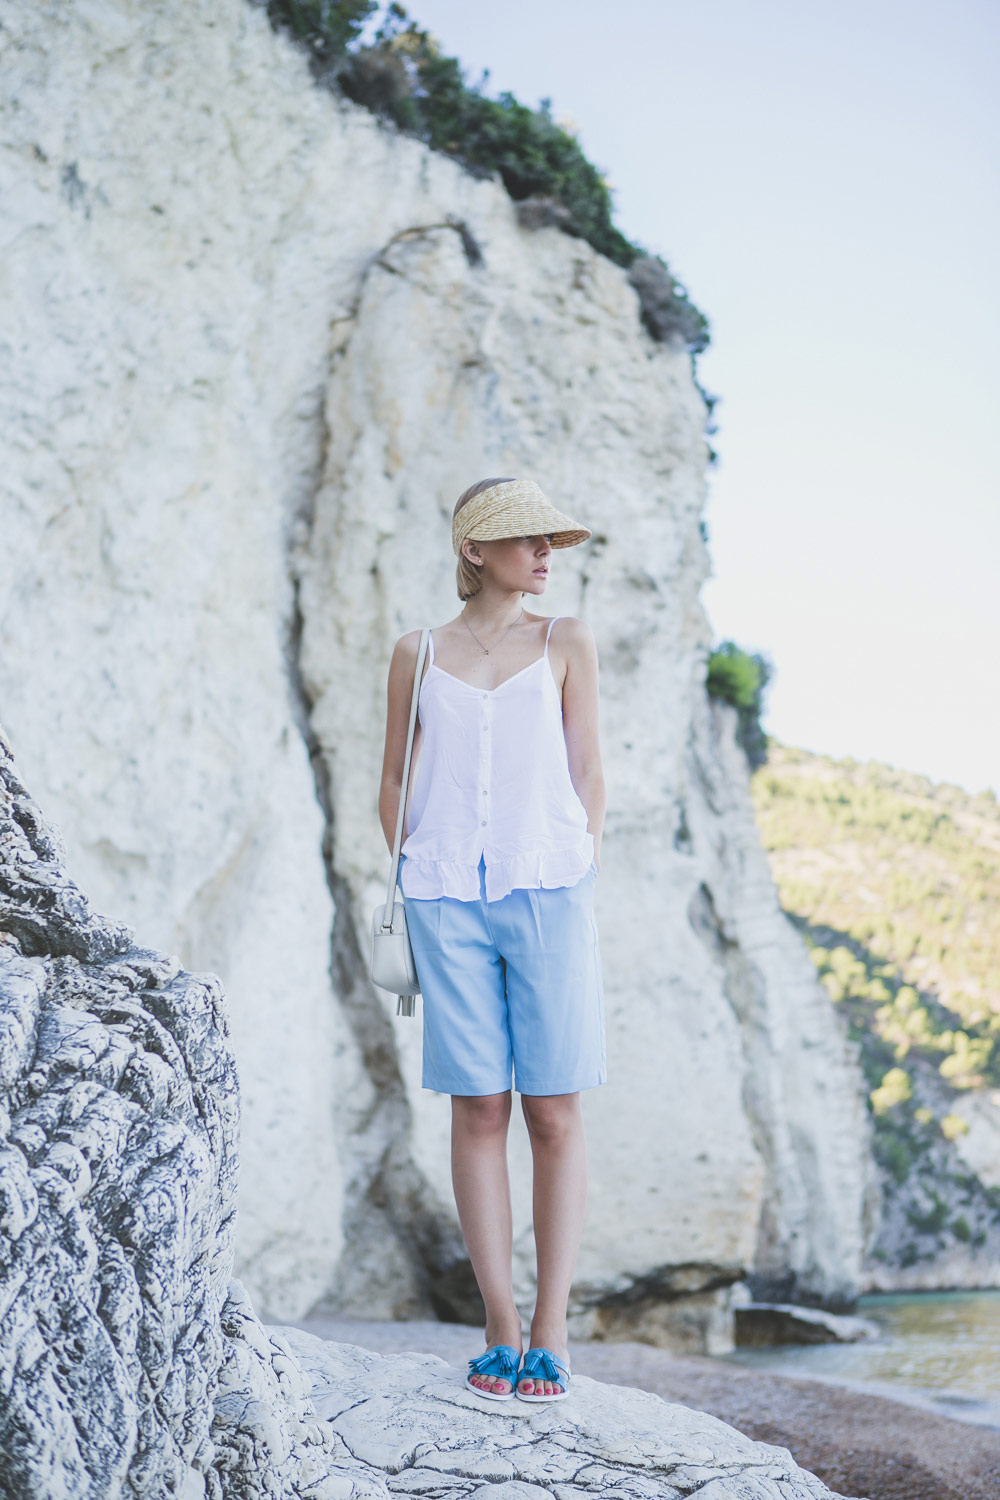 darya-kamalova-thecablook-fashion-lifestyle-blogger-from-thecablook-com-in-puglia-gargano-baia-dei-faraglioni-allegro-italia-in-asos-visor-and-blue-frontrowshop-shorts-with-gucci-disco-soho-bag-1562